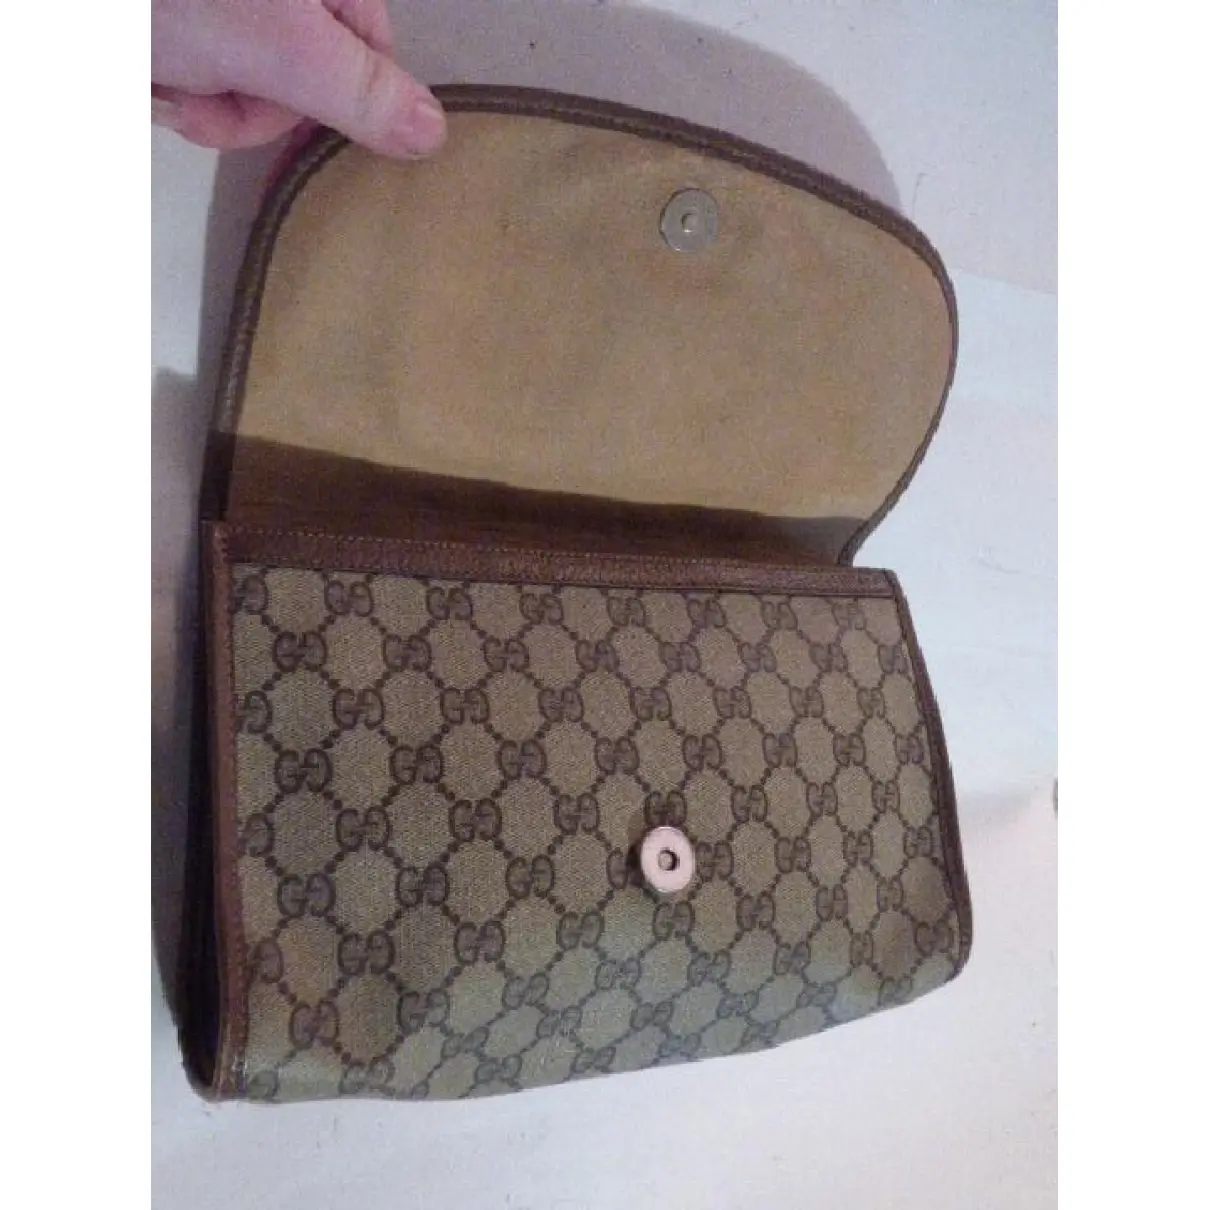 Buy Gucci Ophidia leather clutch bag online - Vintage